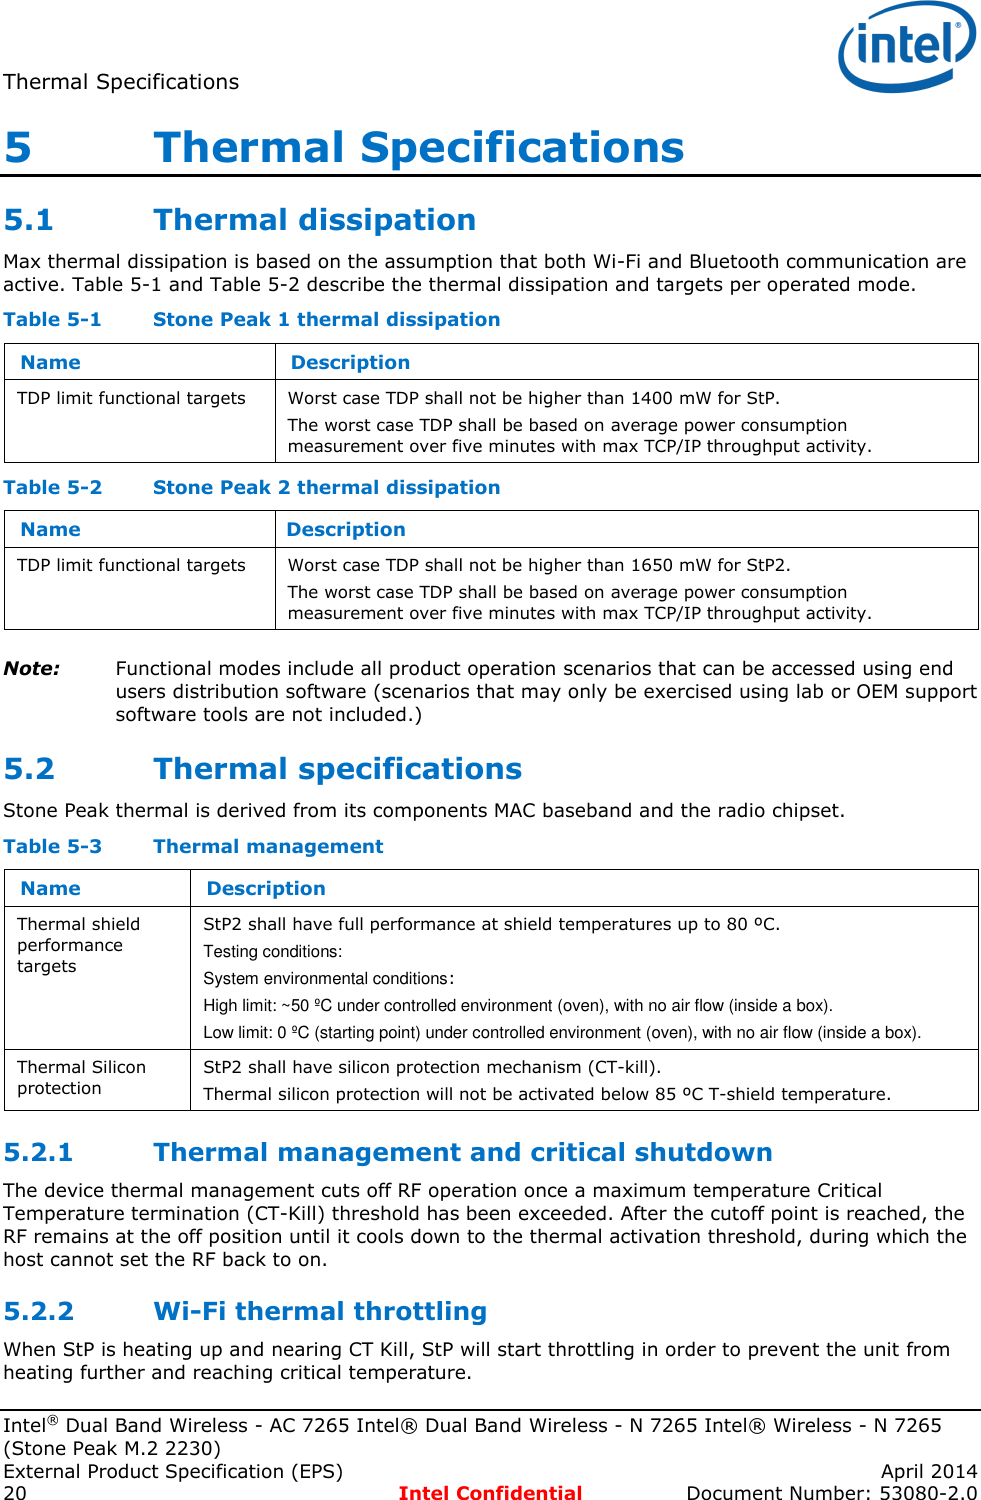 Thermal Specifications   Intel® Dual Band Wireless - AC 7265 Intel® Dual Band Wireless - N 7265 Intel® Wireless - N 7265 (Stone Peak M.2 2230) External Product Specification (EPS)    April 2014 20  Intel Confidential  Document Number: 53080-2.0 5   Thermal Specifications 5.1 Thermal dissipation Max thermal dissipation is based on the assumption that both Wi-Fi and Bluetooth communication are active. Table 5-1 and Table 5-2 describe the thermal dissipation and targets per operated mode. Table 5-1  Stone Peak 1 thermal dissipation Name Description TDP limit functional targets Worst case TDP shall not be higher than 1400 mW for StP. The worst case TDP shall be based on average power consumption measurement over five minutes with max TCP/IP throughput activity. Table 5-2  Stone Peak 2 thermal dissipation Name Description TDP limit functional targets Worst case TDP shall not be higher than 1650 mW for StP2. The worst case TDP shall be based on average power consumption measurement over five minutes with max TCP/IP throughput activity. Note: Functional modes include all product operation scenarios that can be accessed using end users distribution software (scenarios that may only be exercised using lab or OEM support software tools are not included.) 5.2 Thermal specifications Stone Peak thermal is derived from its components MAC baseband and the radio chipset. Table 5-3  Thermal management Name Description Thermal shield performance targets StP2 shall have full performance at shield temperatures up to 80 ºC. Testing conditions: System environmental conditions:  High limit: ~50 ºC under controlled environment (oven), with no air flow (inside a box). Low limit: 0 ºC (starting point) under controlled environment (oven), with no air flow (inside a box). Thermal Silicon protection  StP2 shall have silicon protection mechanism (CT-kill).  Thermal silicon protection will not be activated below 85 ºC T-shield temperature.  5.2.1 Thermal management and critical shutdown The device thermal management cuts off RF operation once a maximum temperature Critical Temperature termination (CT-Kill) threshold has been exceeded. After the cutoff point is reached, the RF remains at the off position until it cools down to the thermal activation threshold, during which the host cannot set the RF back to on. 5.2.2 Wi-Fi thermal throttling When StP is heating up and nearing CT Kill, StP will start throttling in order to prevent the unit from heating further and reaching critical temperature. 